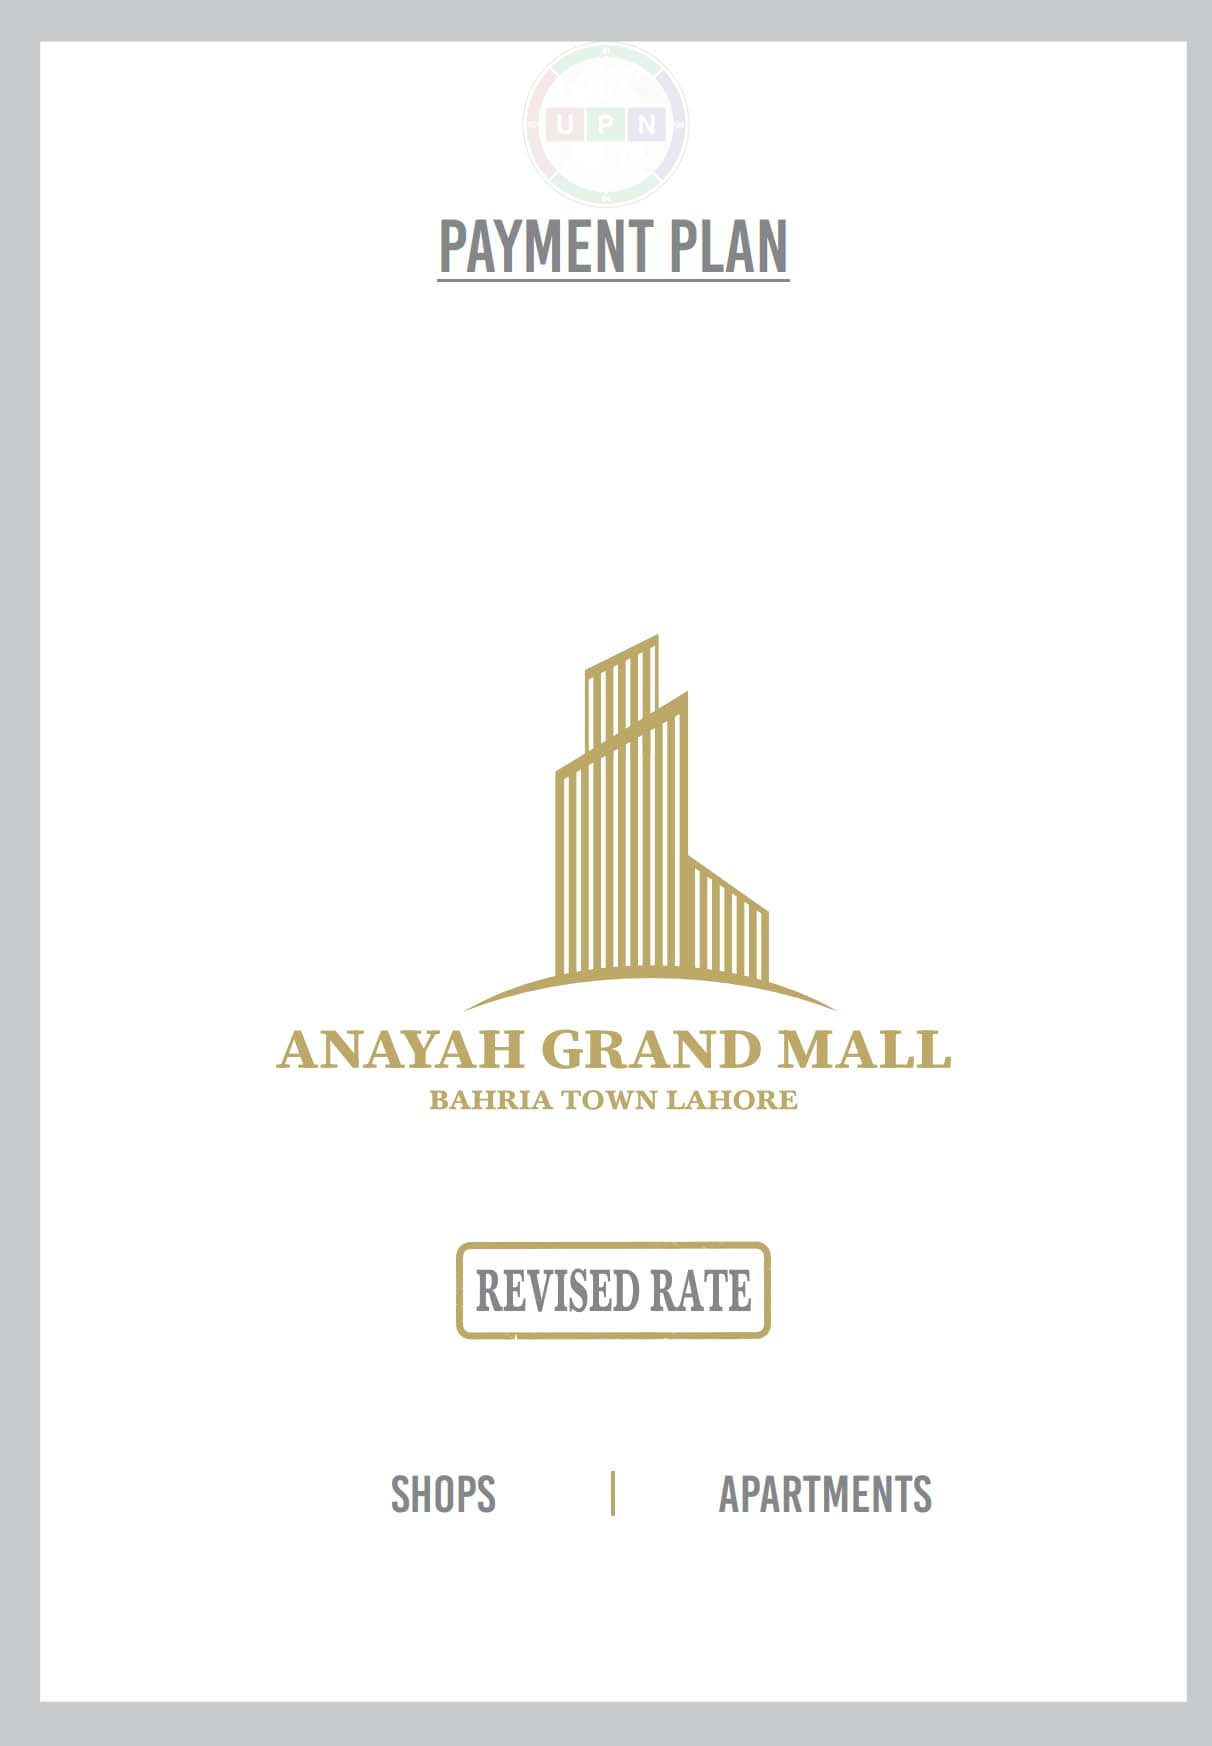 Anayah Grand Mall Revised Payment Plan